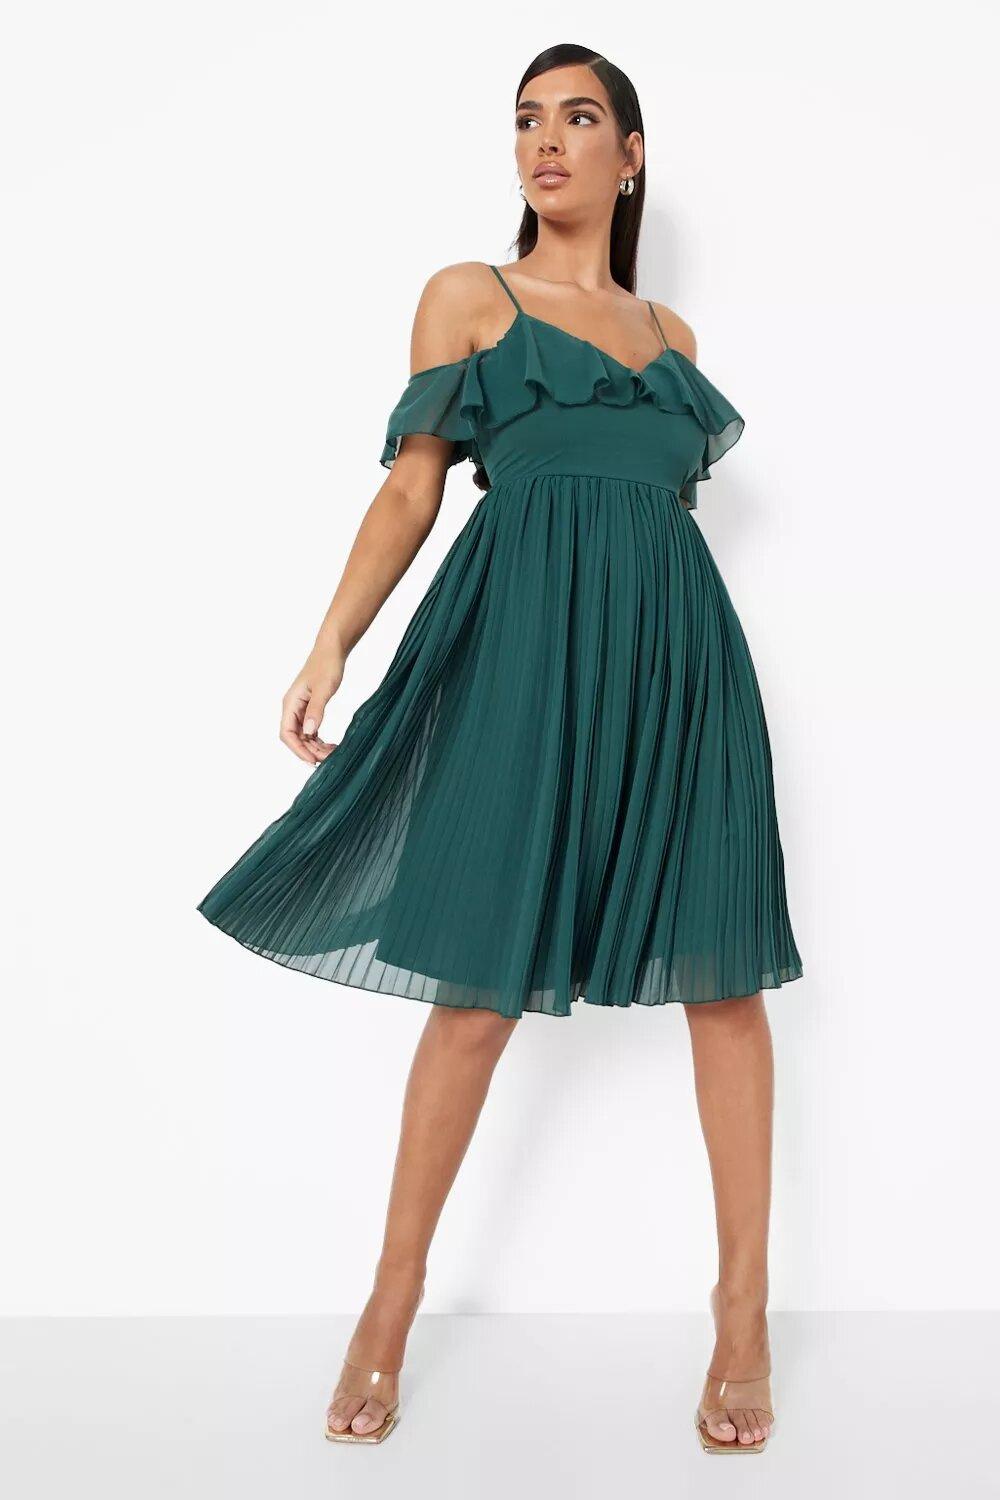 38 Gorgeous Green Bridesmaid Dresses 2022 - hitched.co.uk - hitched.co.uk